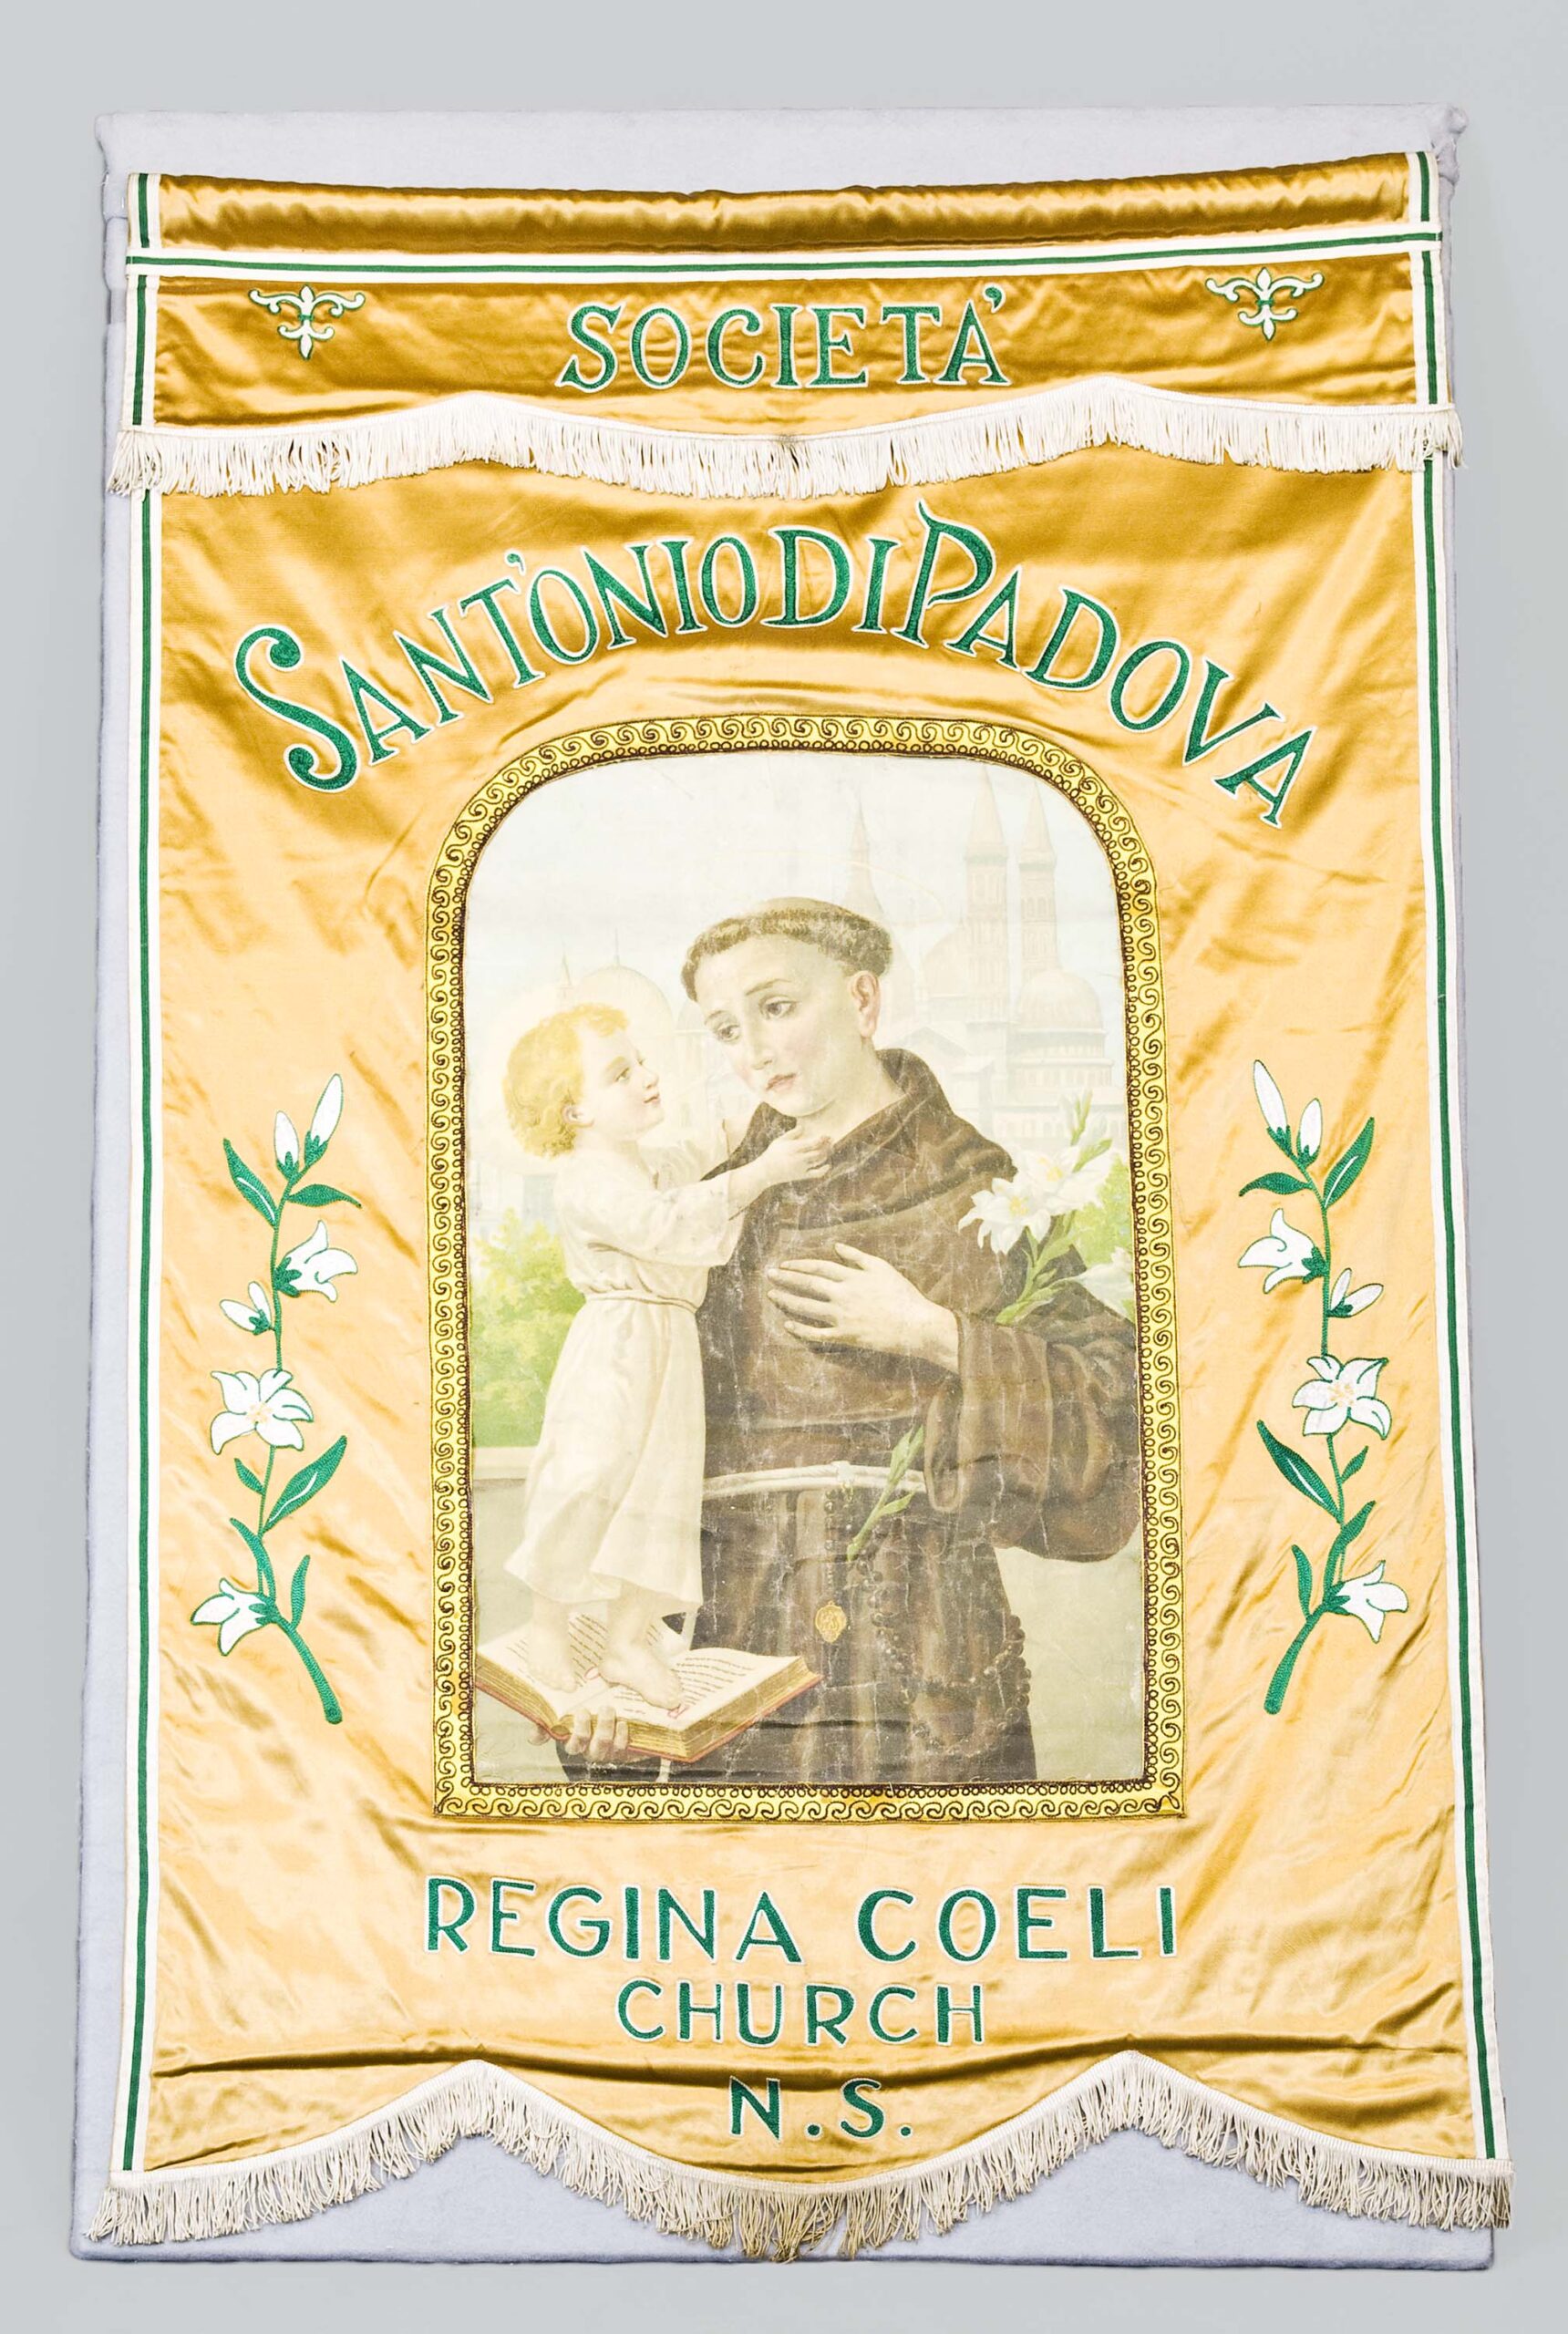 Front view of a banner featuring San Antonio and a young child. The banner is yellow with green, white, and gold accents. The banner also features the name of a church written in Italian.